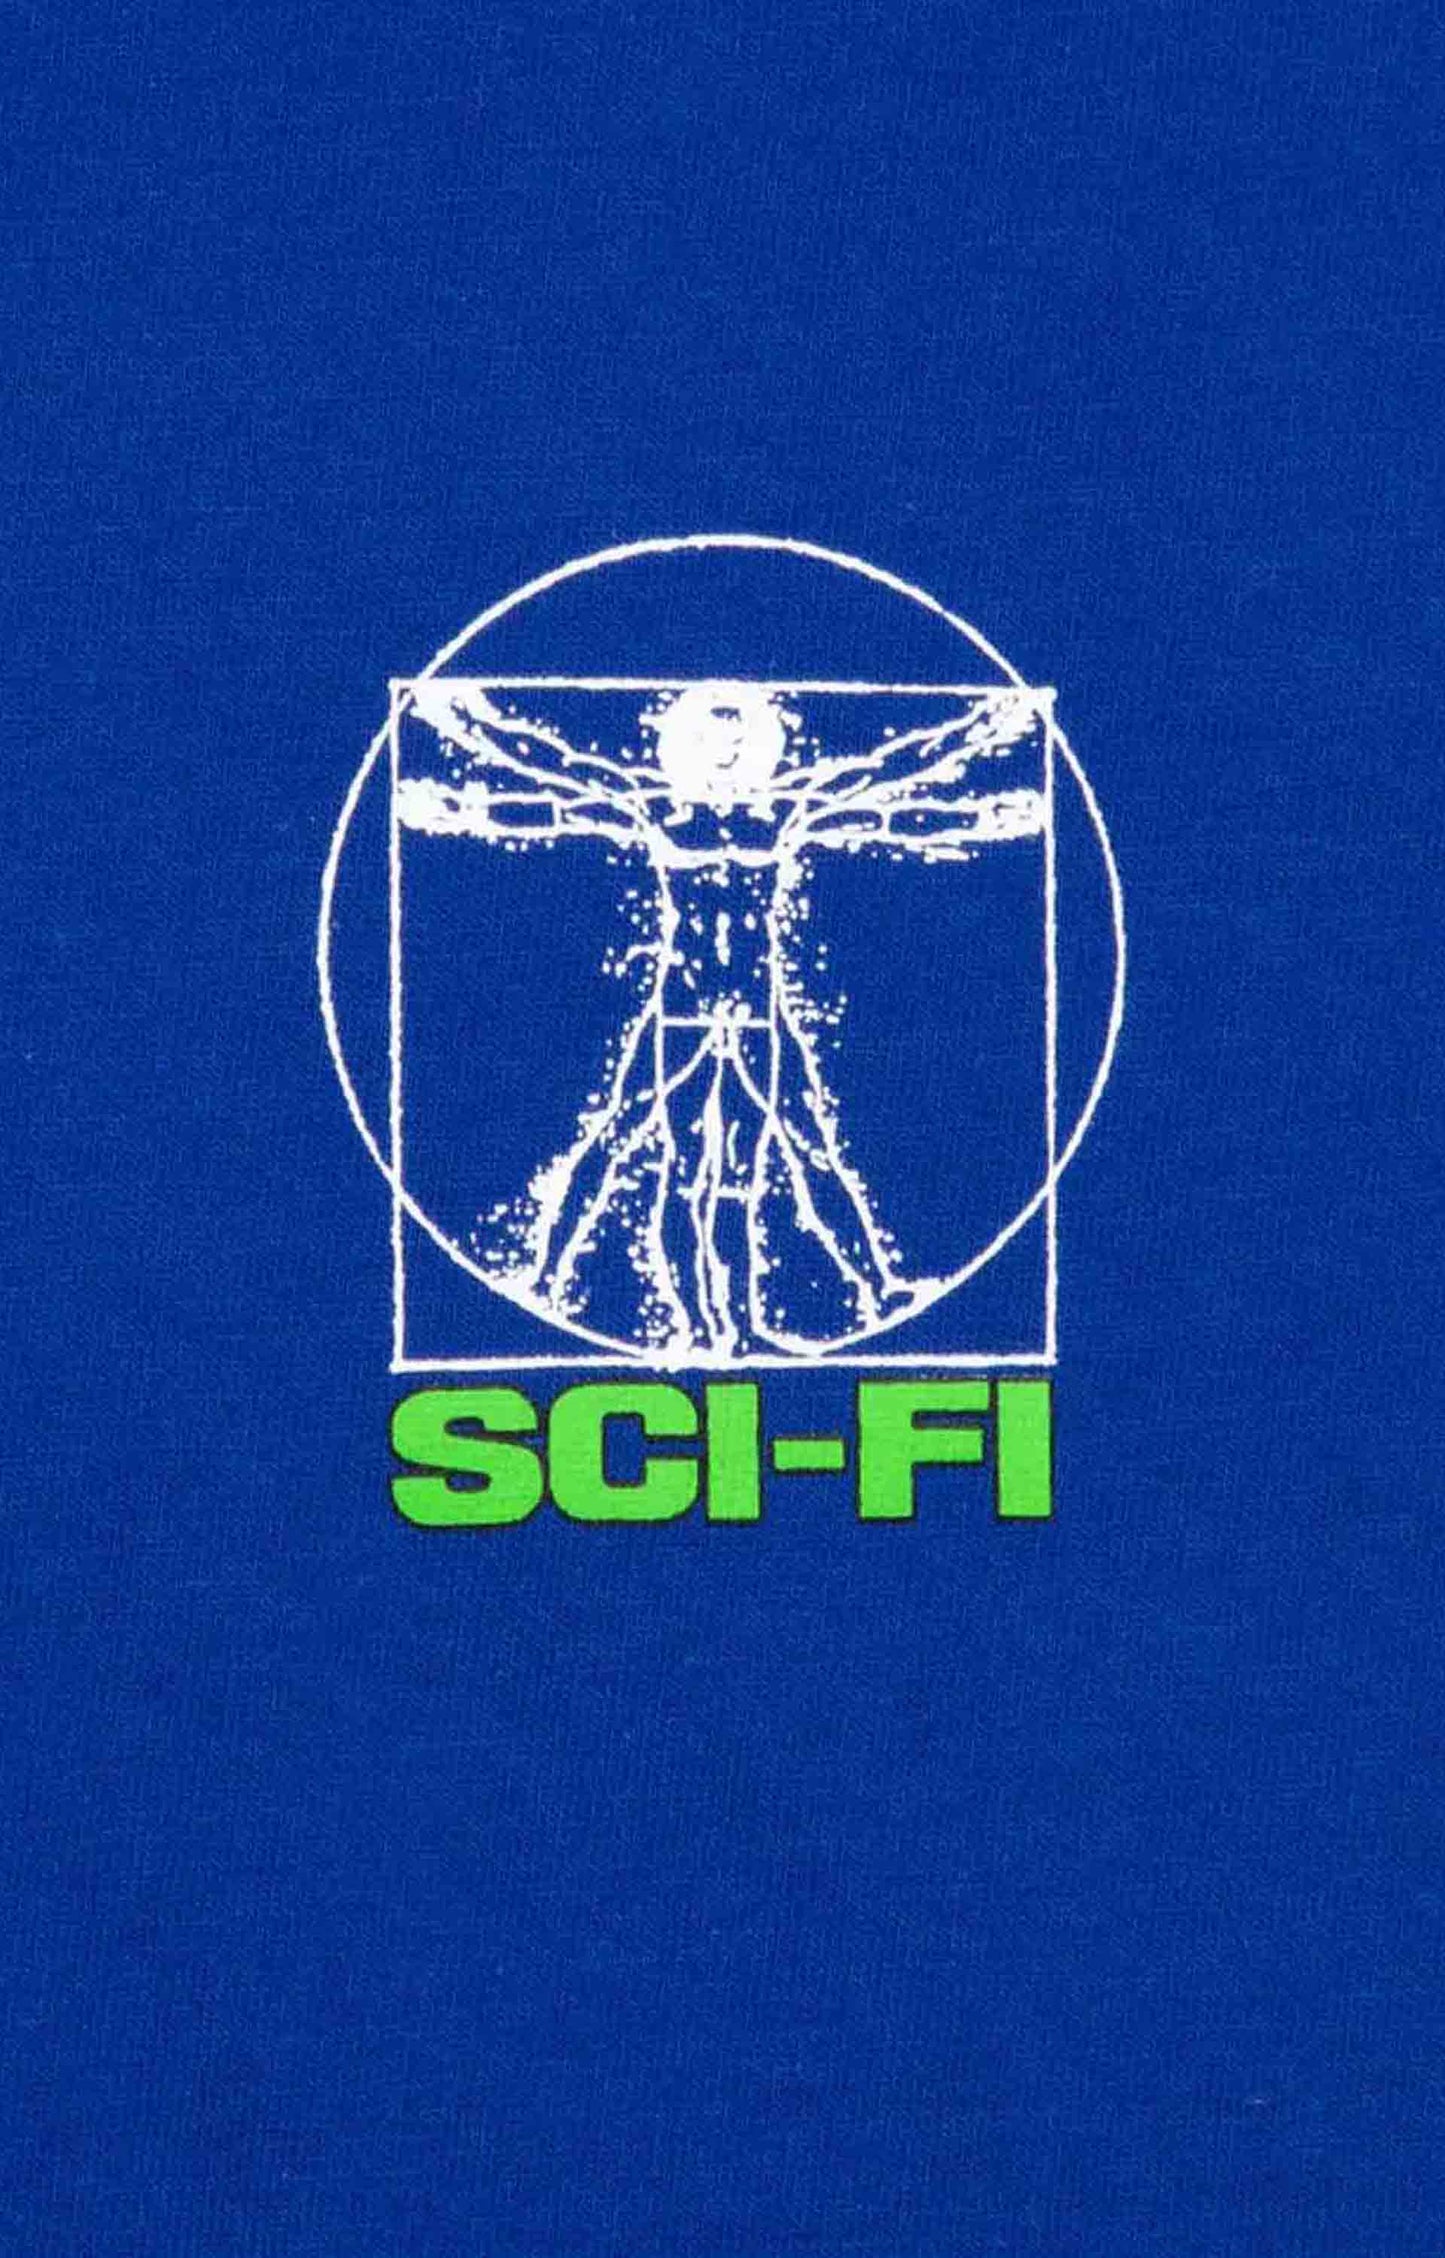 Sci-Fi Fantasy Chain of Being 2 T-Shirt, Blue